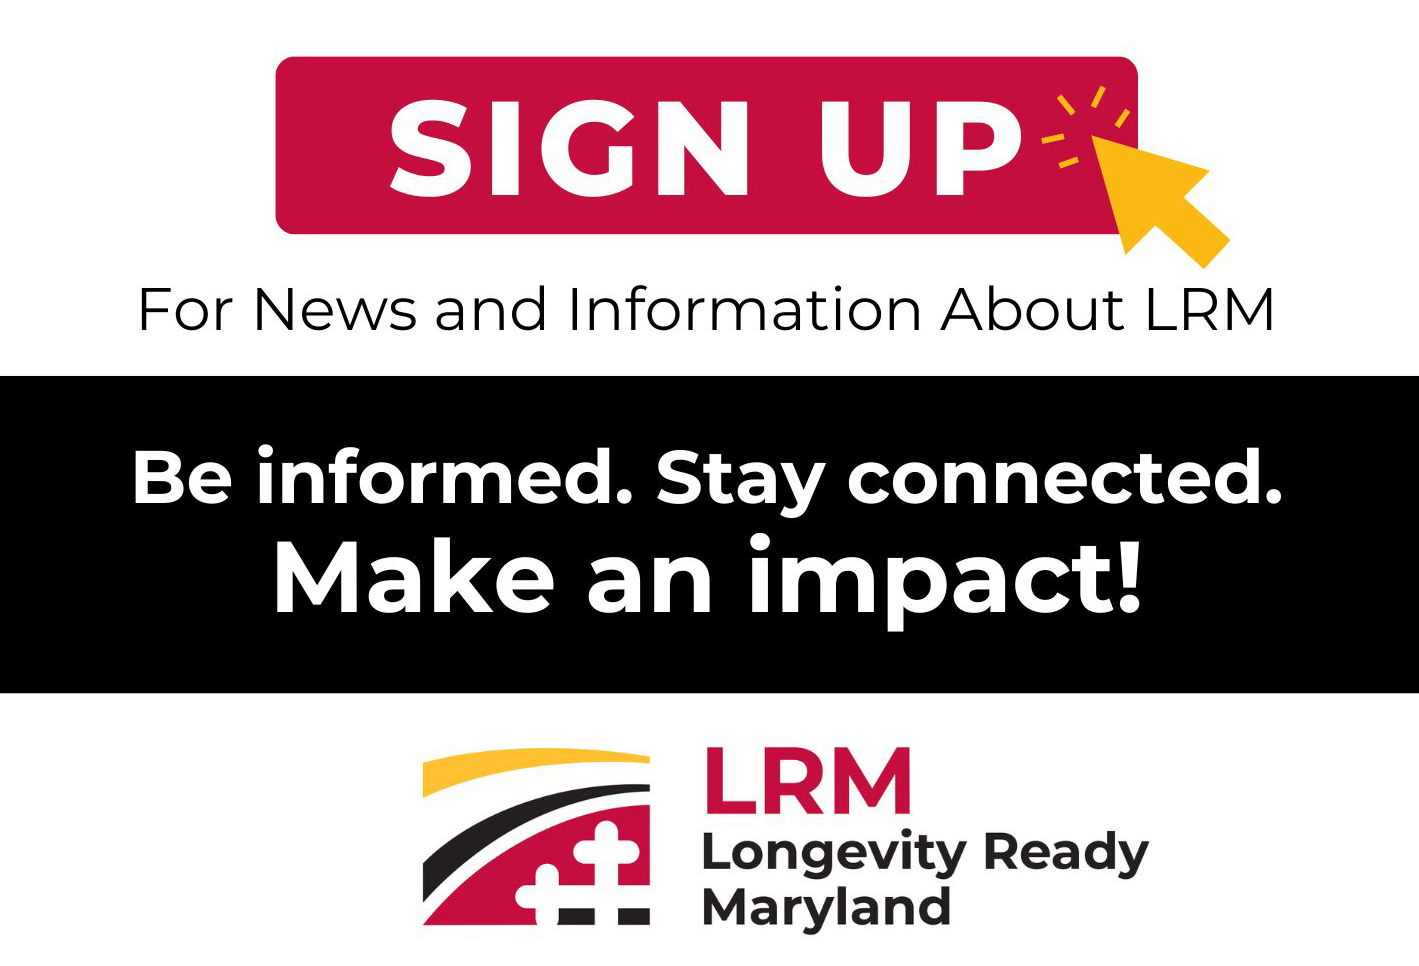 Sign up for News and Information About LRM.